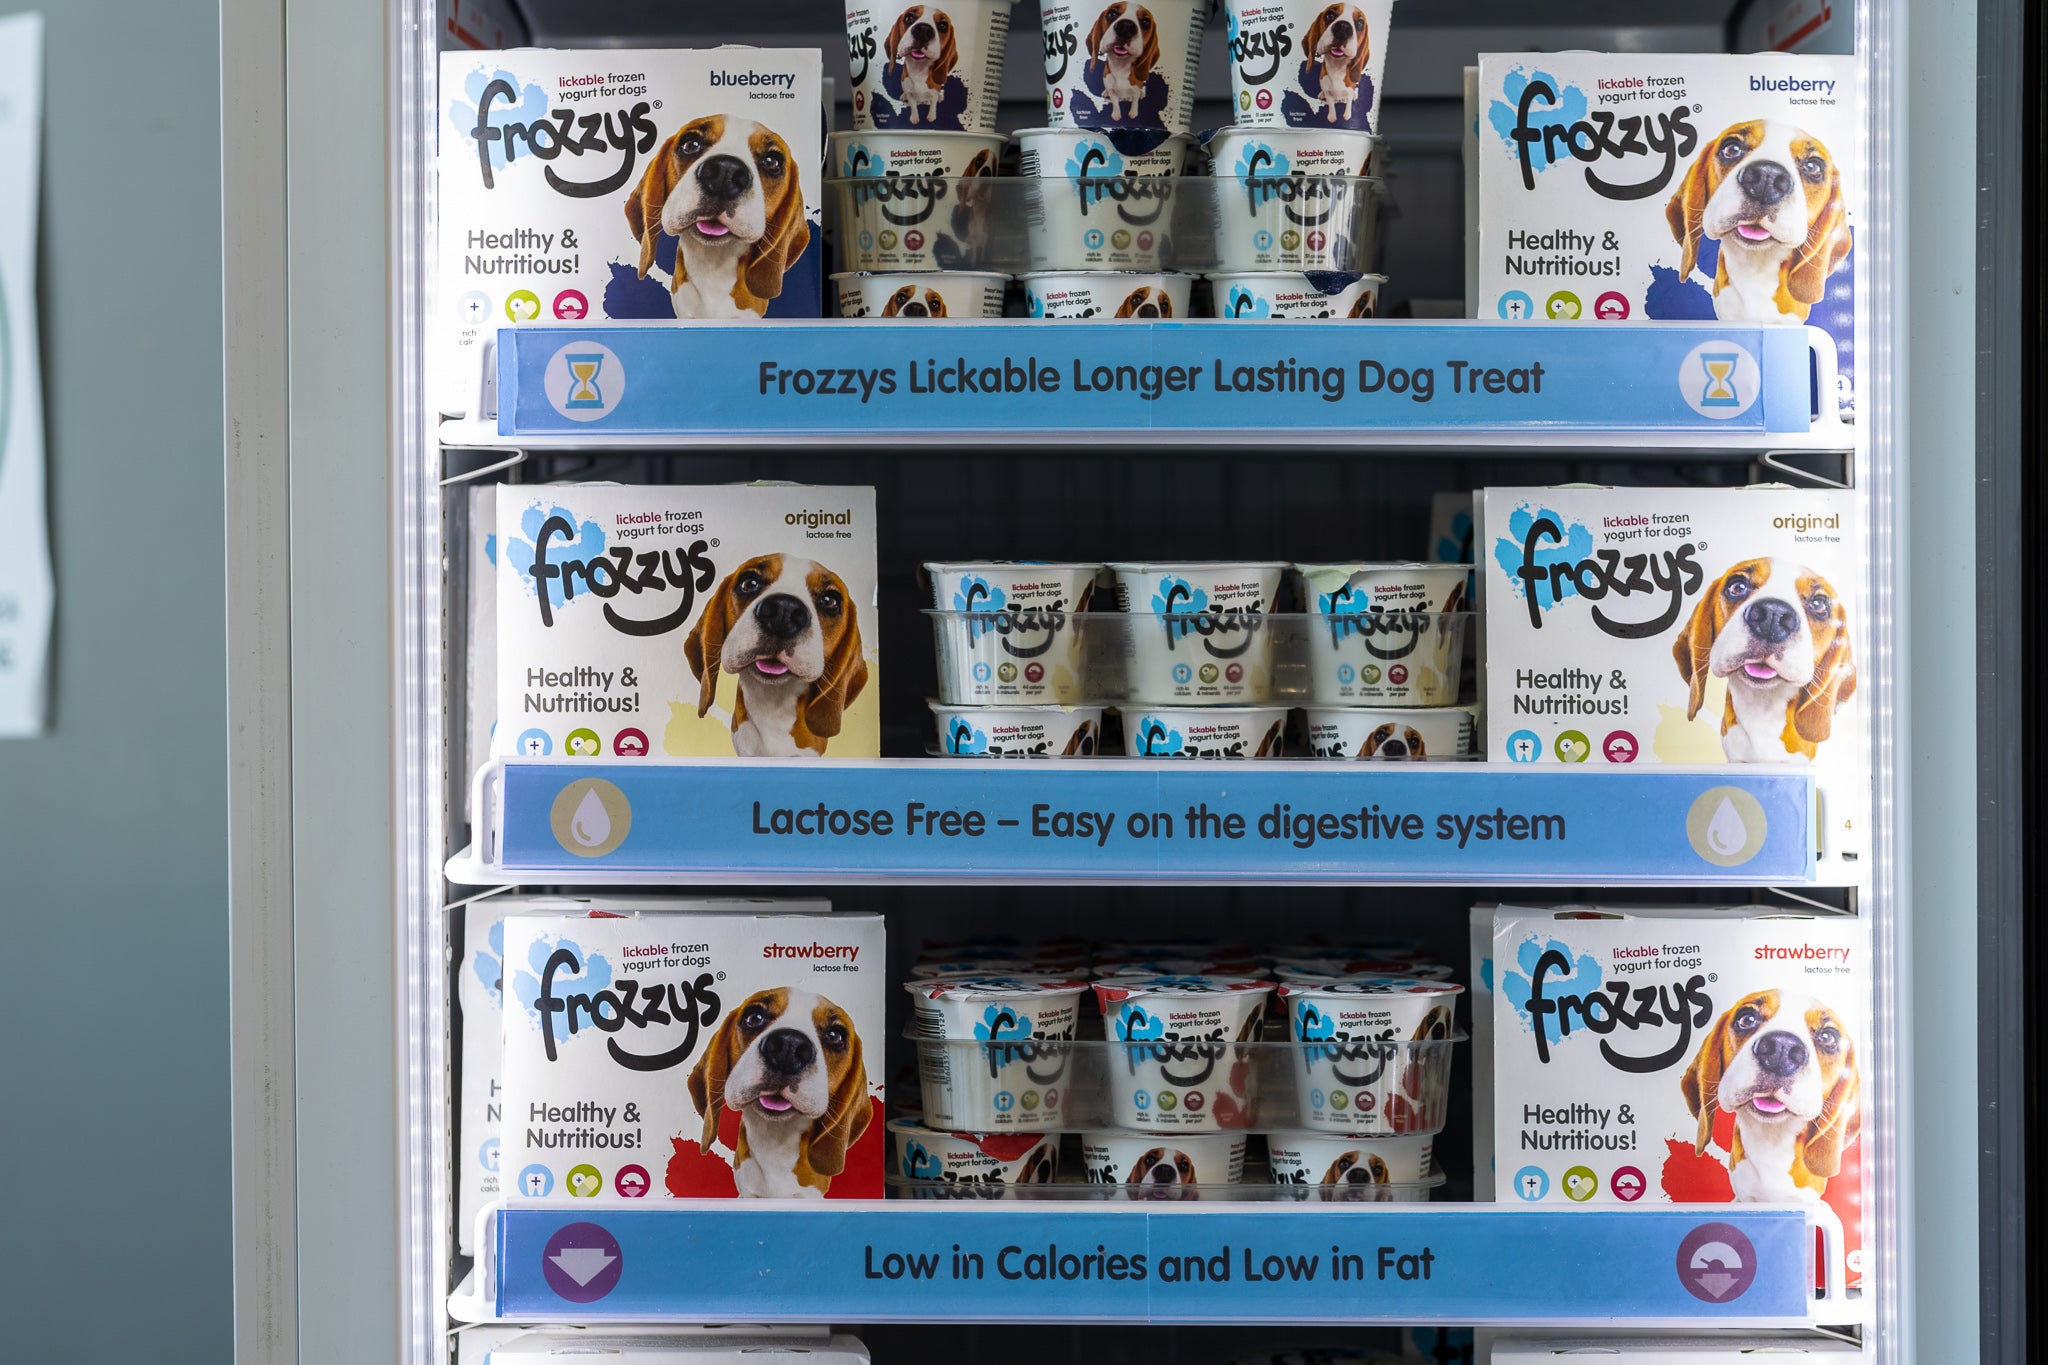 Become A Frozzys Stockist